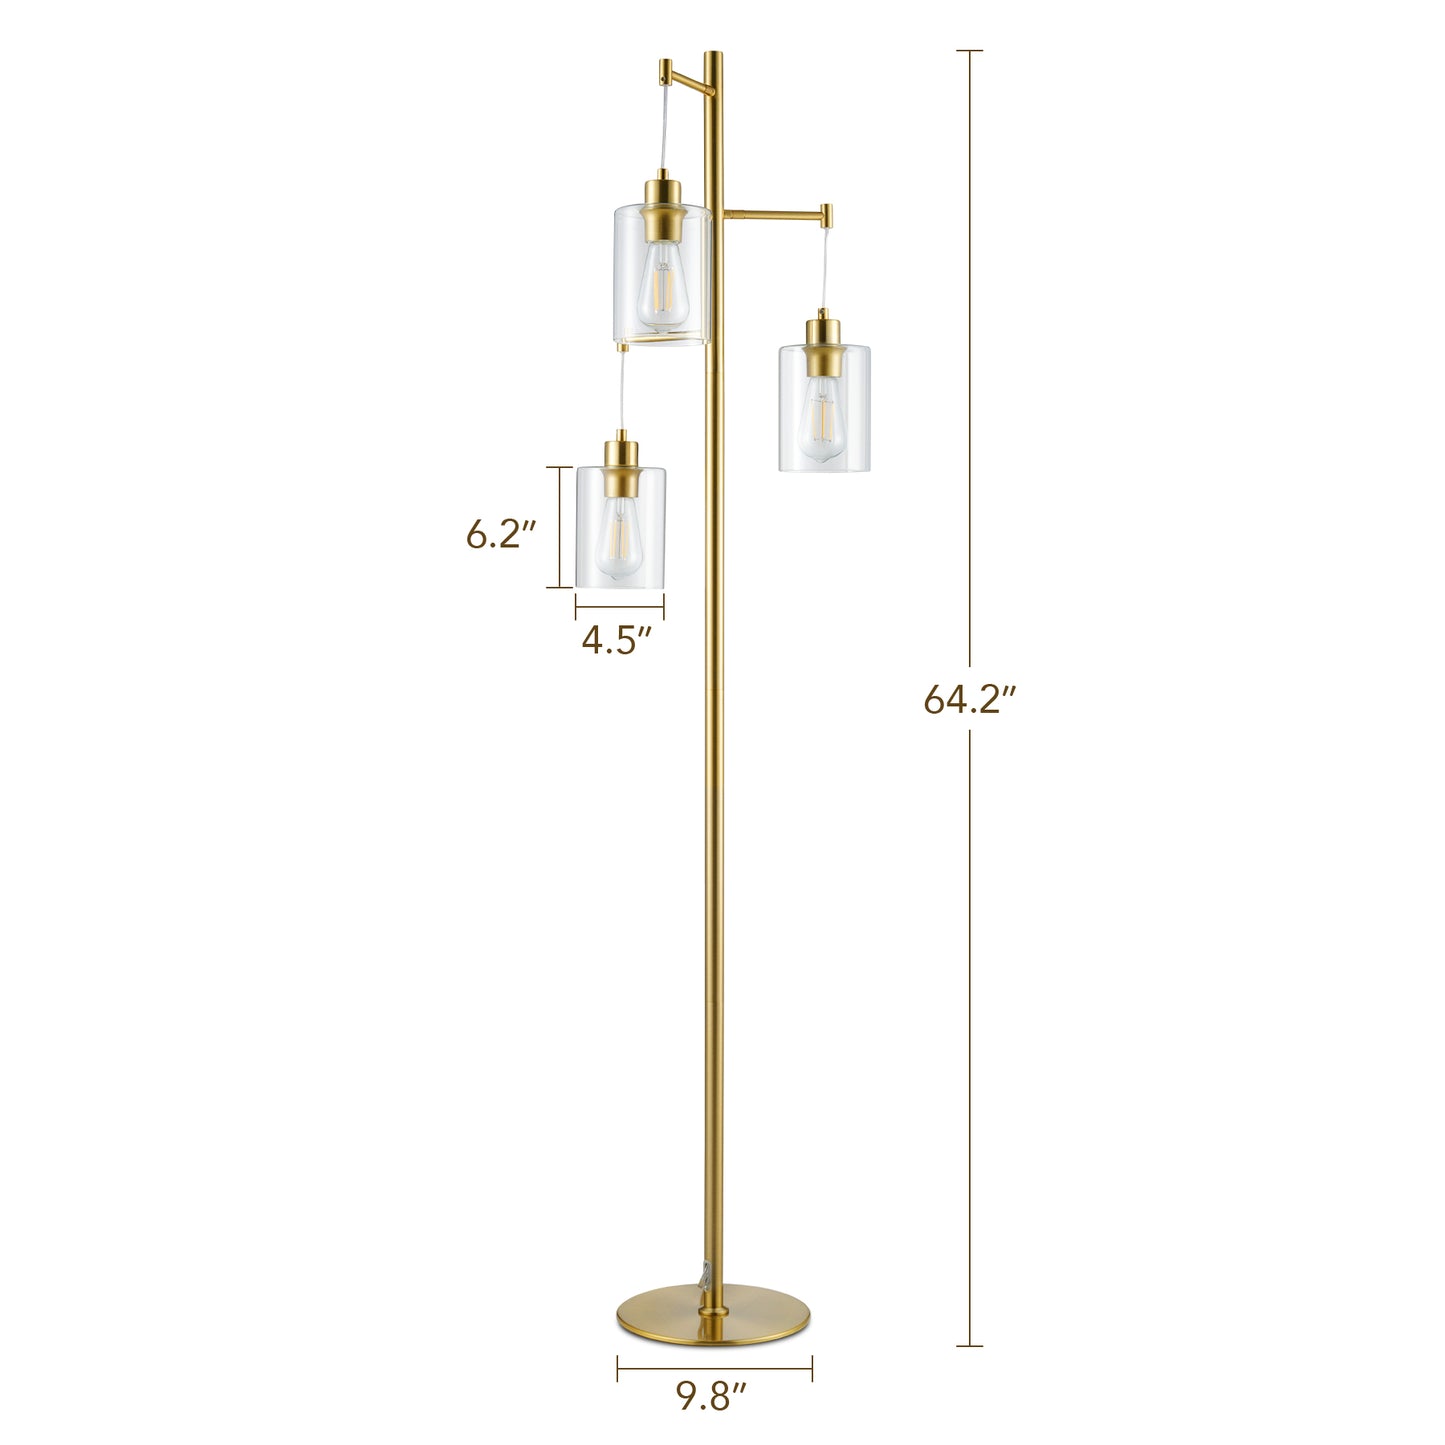 Bestco Industrial Floor Lamp with 3 LED Bulbs Hanging Glass Shades 64" Metal Pole Gold